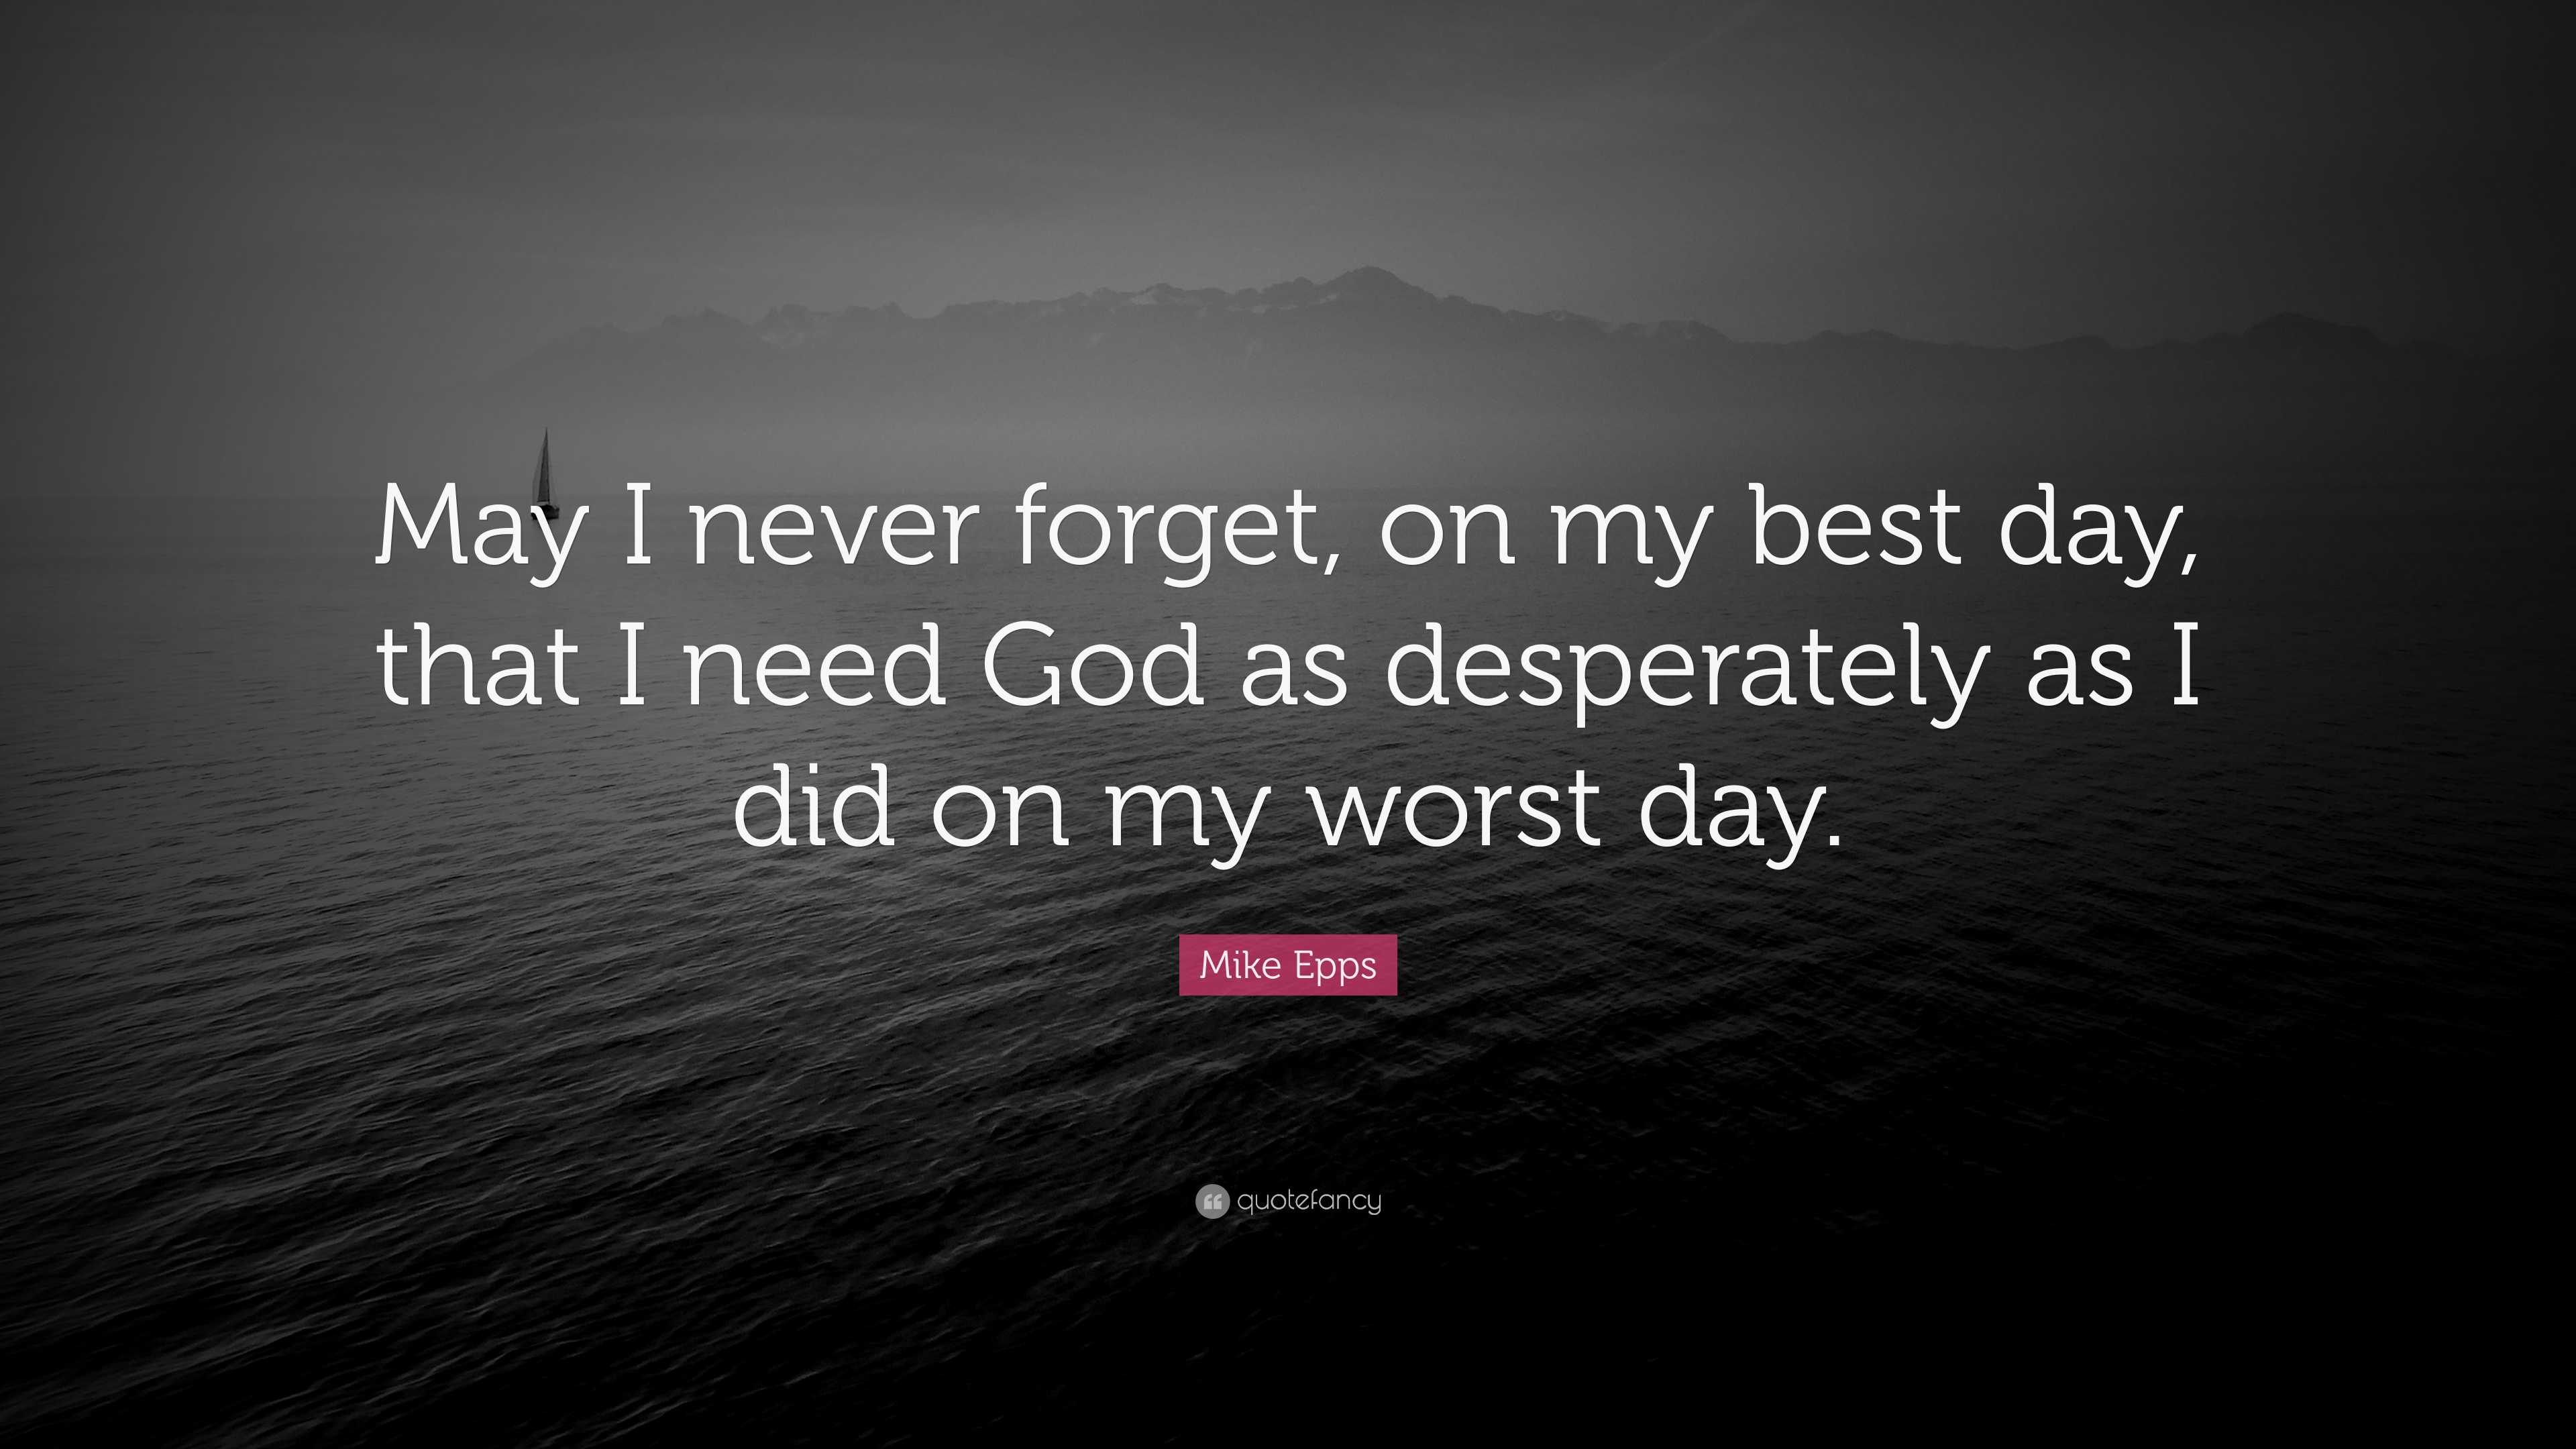 Mike Epps Quote: “May I never forget, on my best day, that I need God as